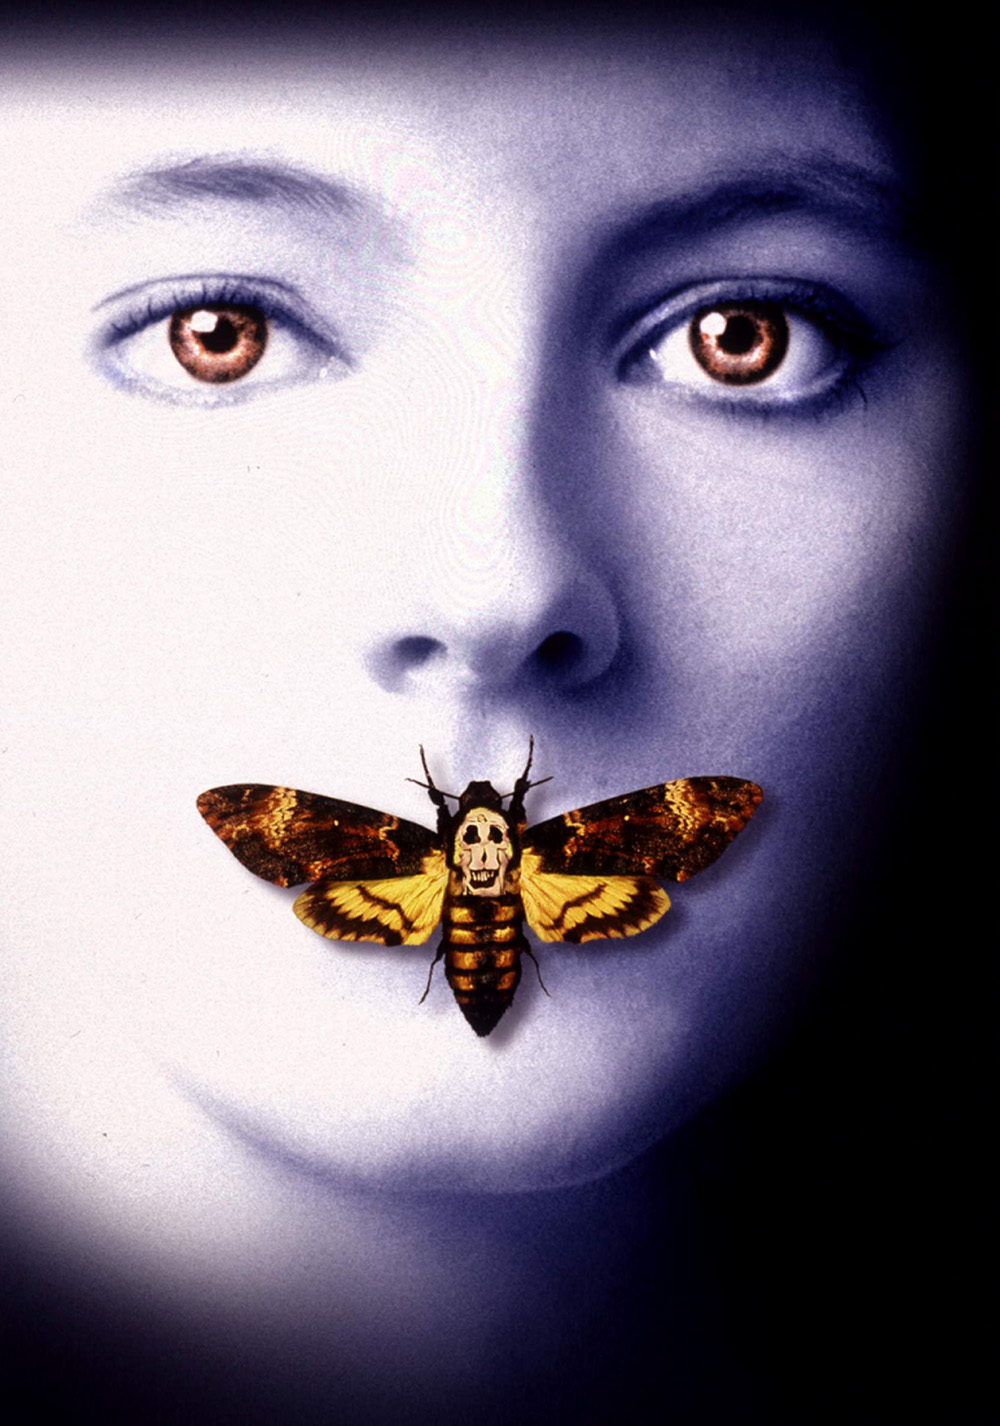 Only a Film Expert Can Name 14/17 of These Horror Movies from Their Posters 04 The Silence of the Lambs